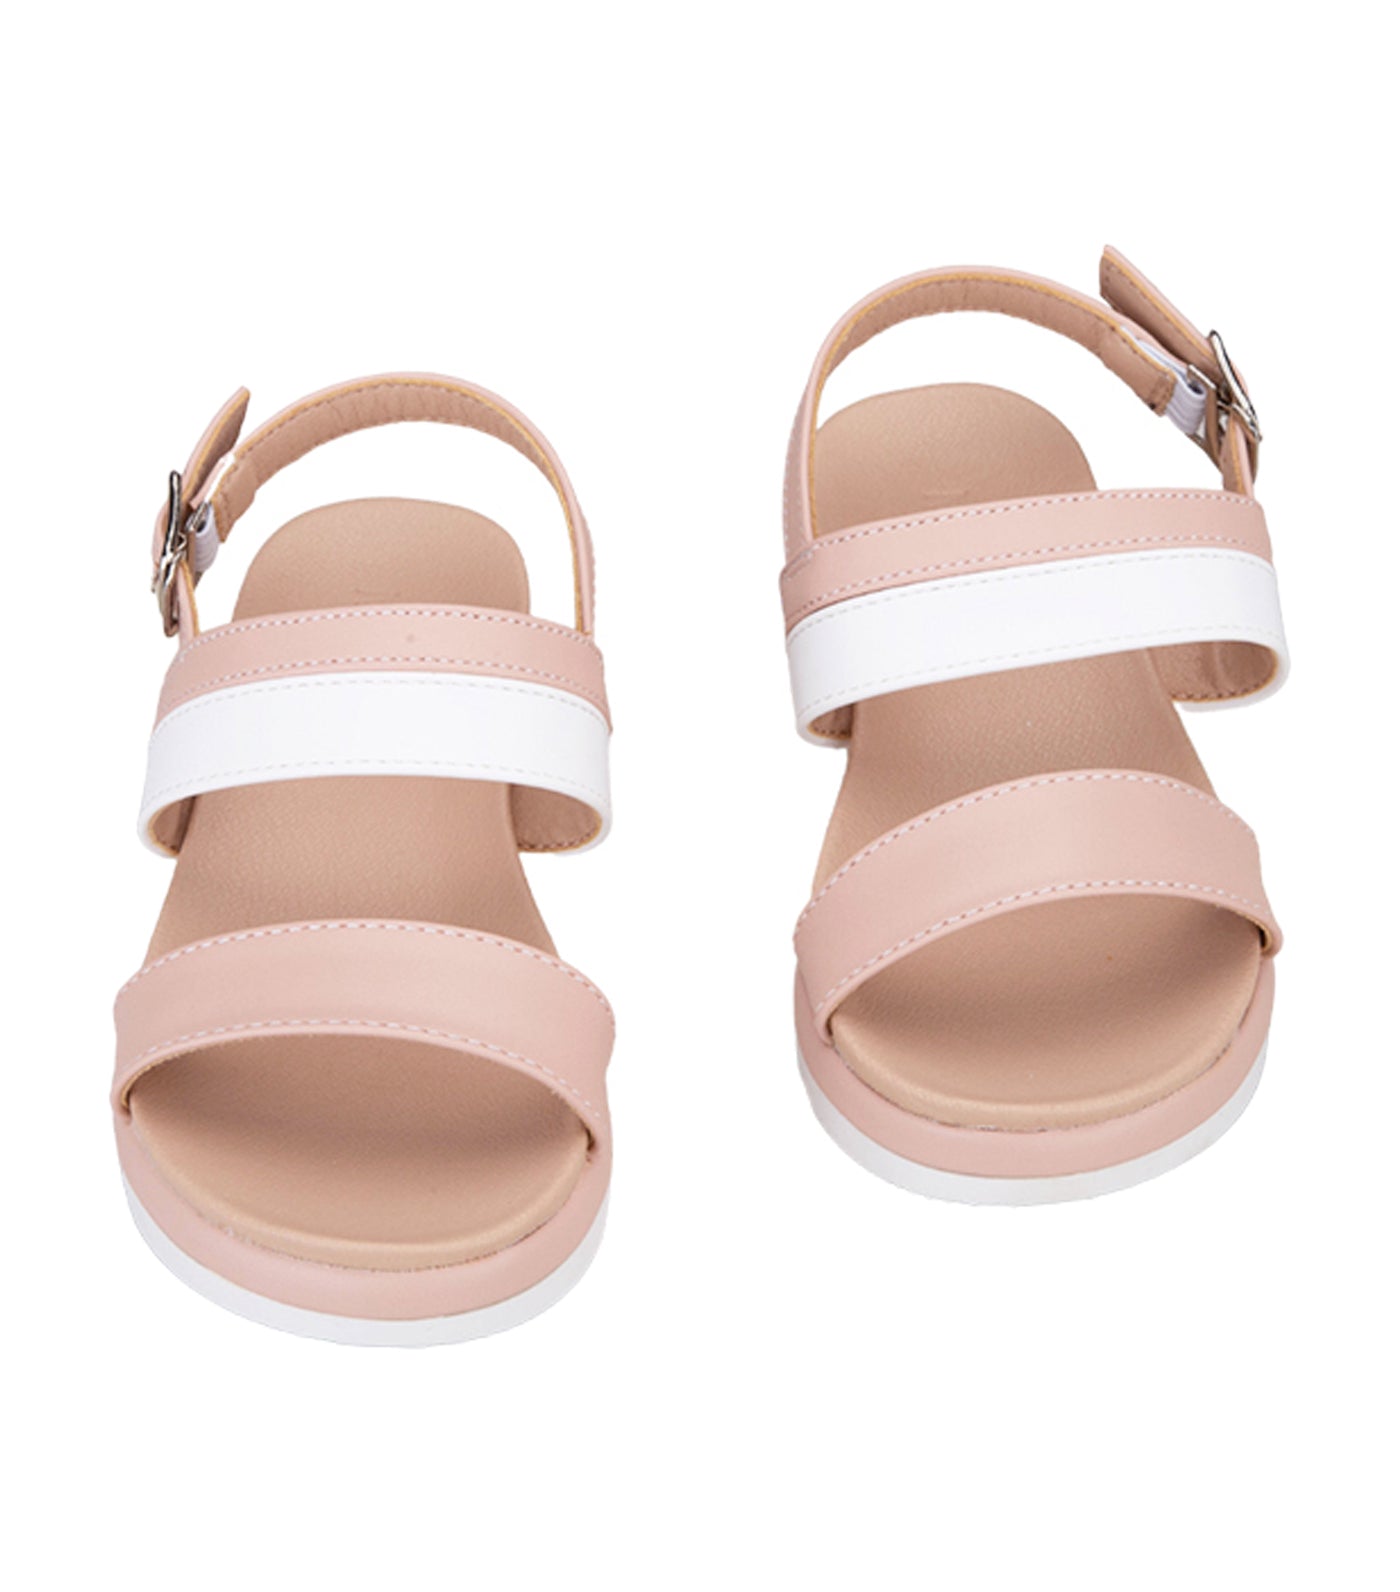 Blanche Kids Sandals for Girls - Pink